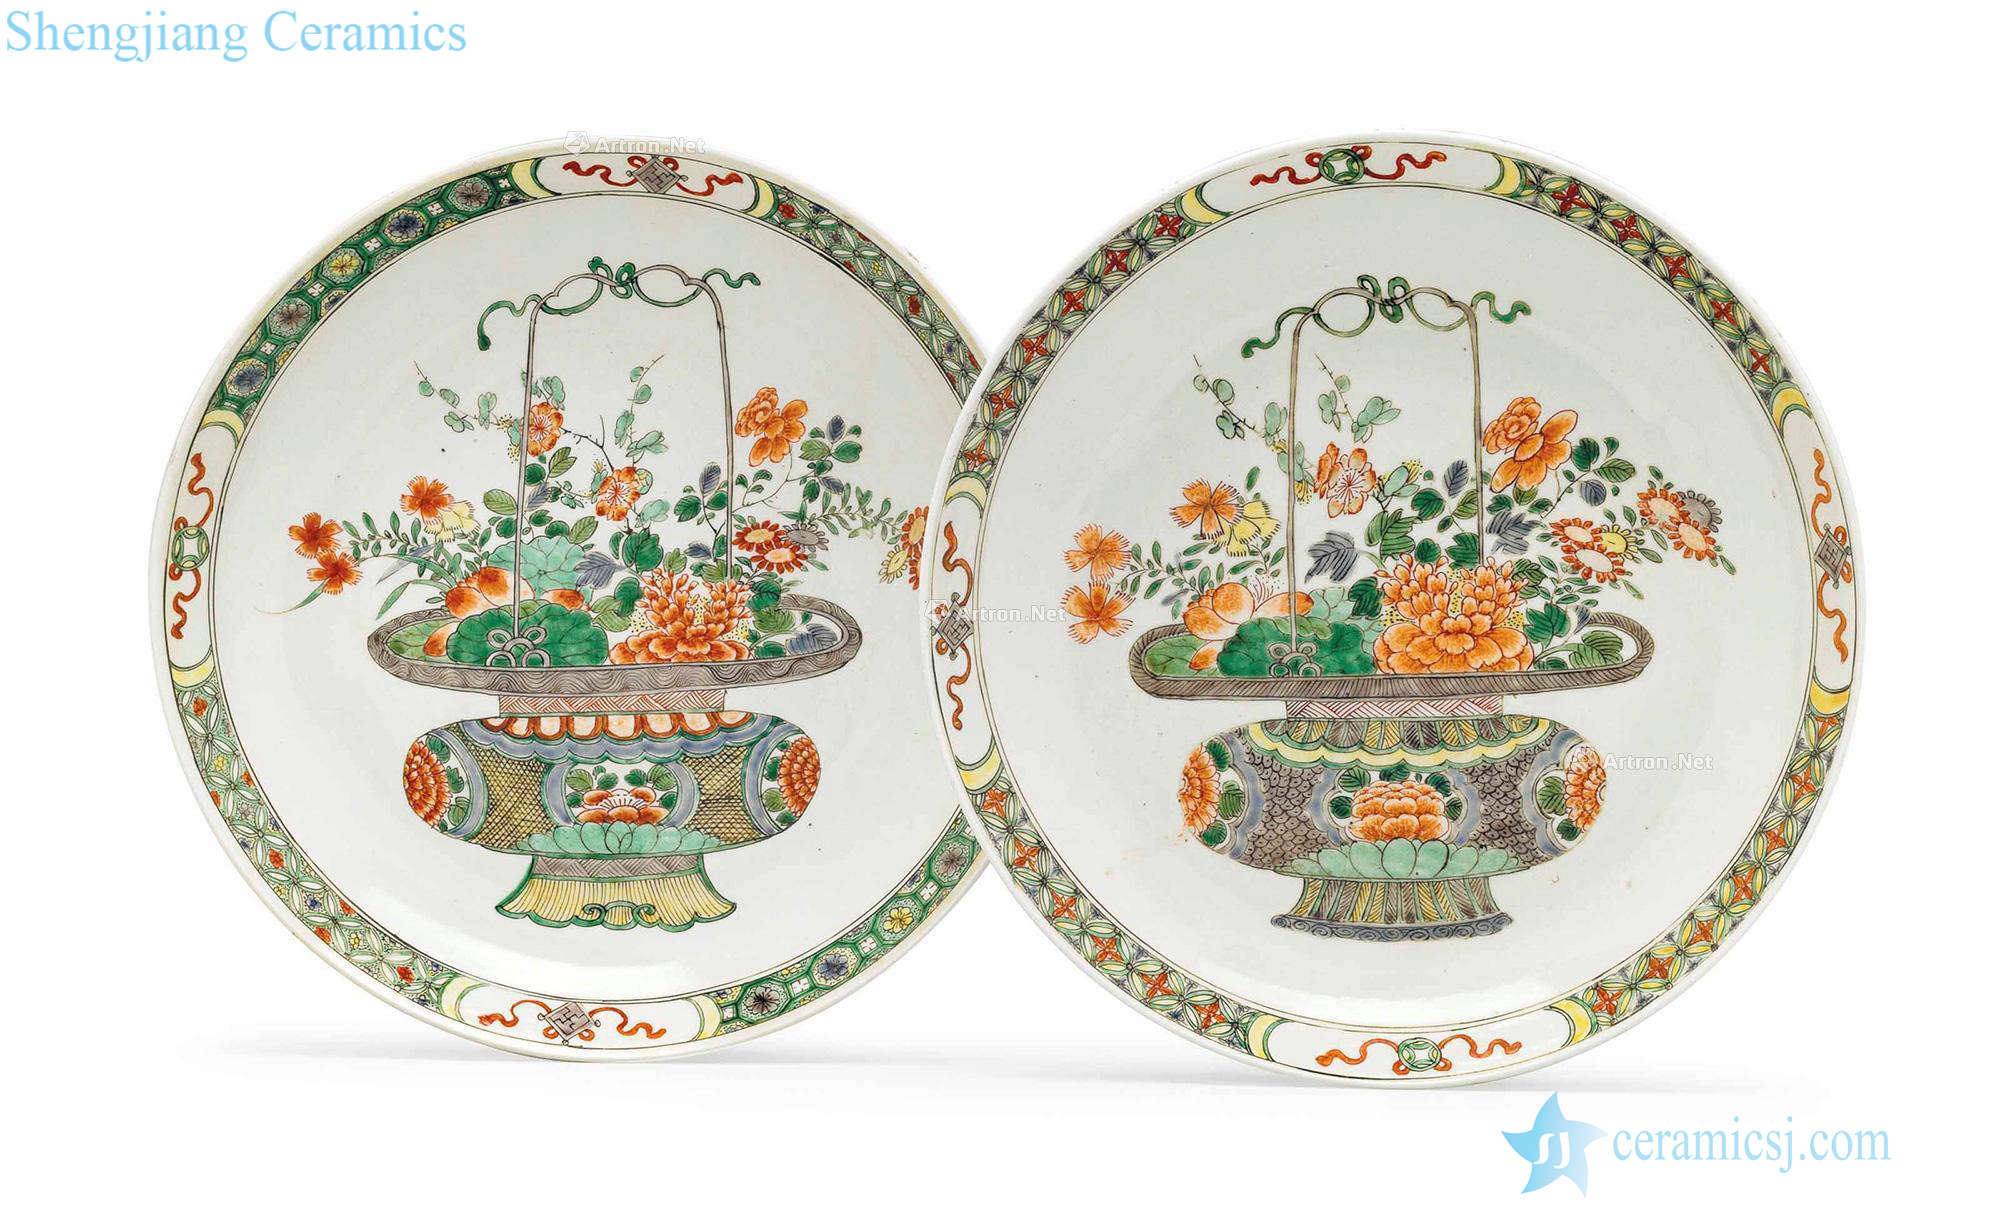 Kangxi period, 1662-1722 - A PAIR OF FAMILLE VERTE SAUCER DISHES WITH BASKETS OF FLOWERS